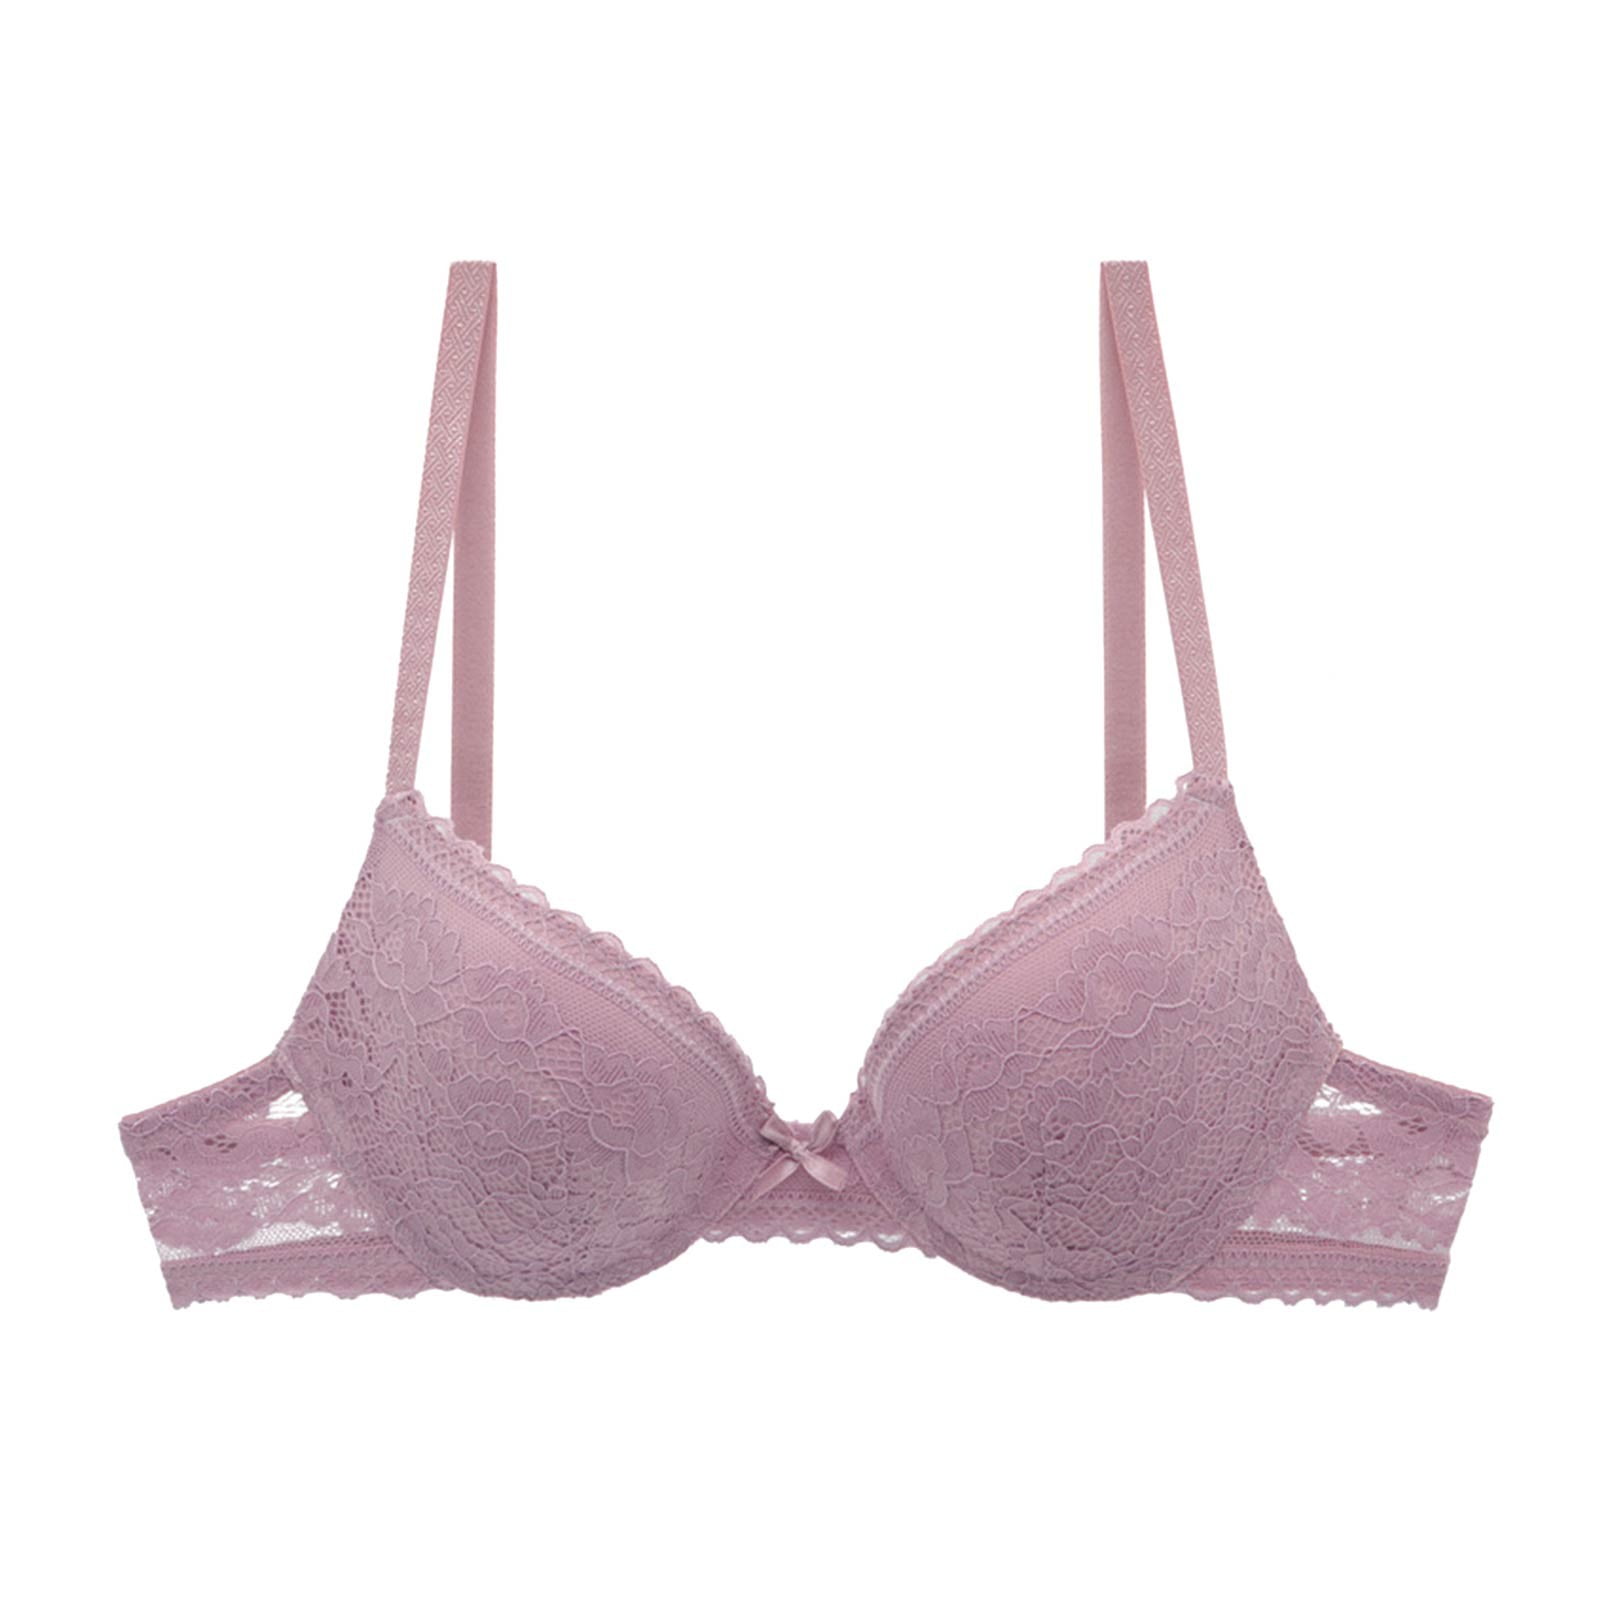 H & M - Lace push-up bra - Red, Compare